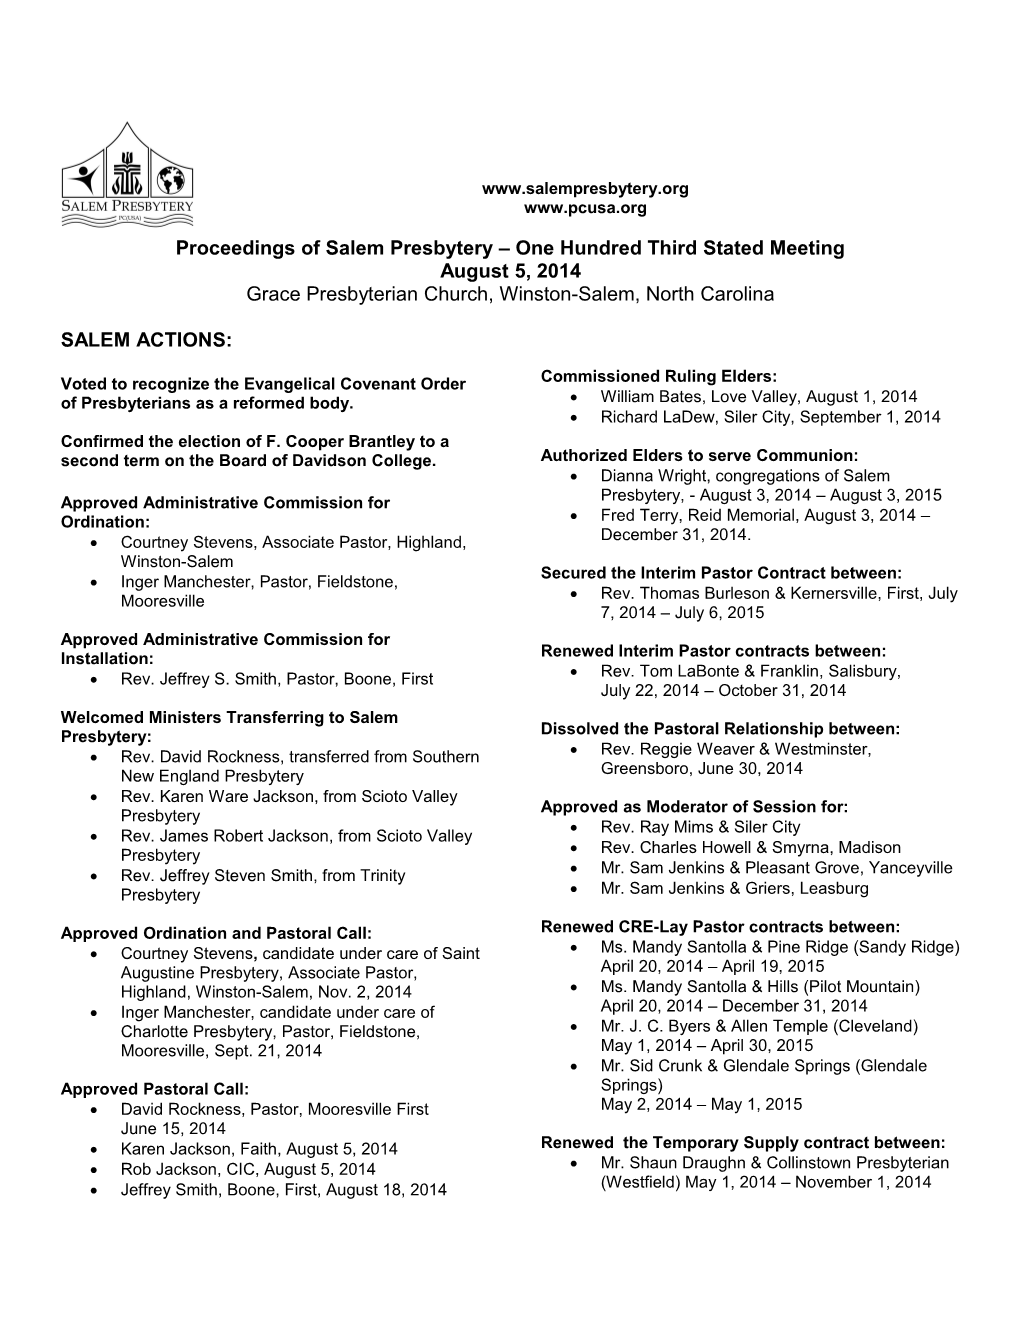 Proceedings of Salem Presbytery One Hundred Third Stated Meeting